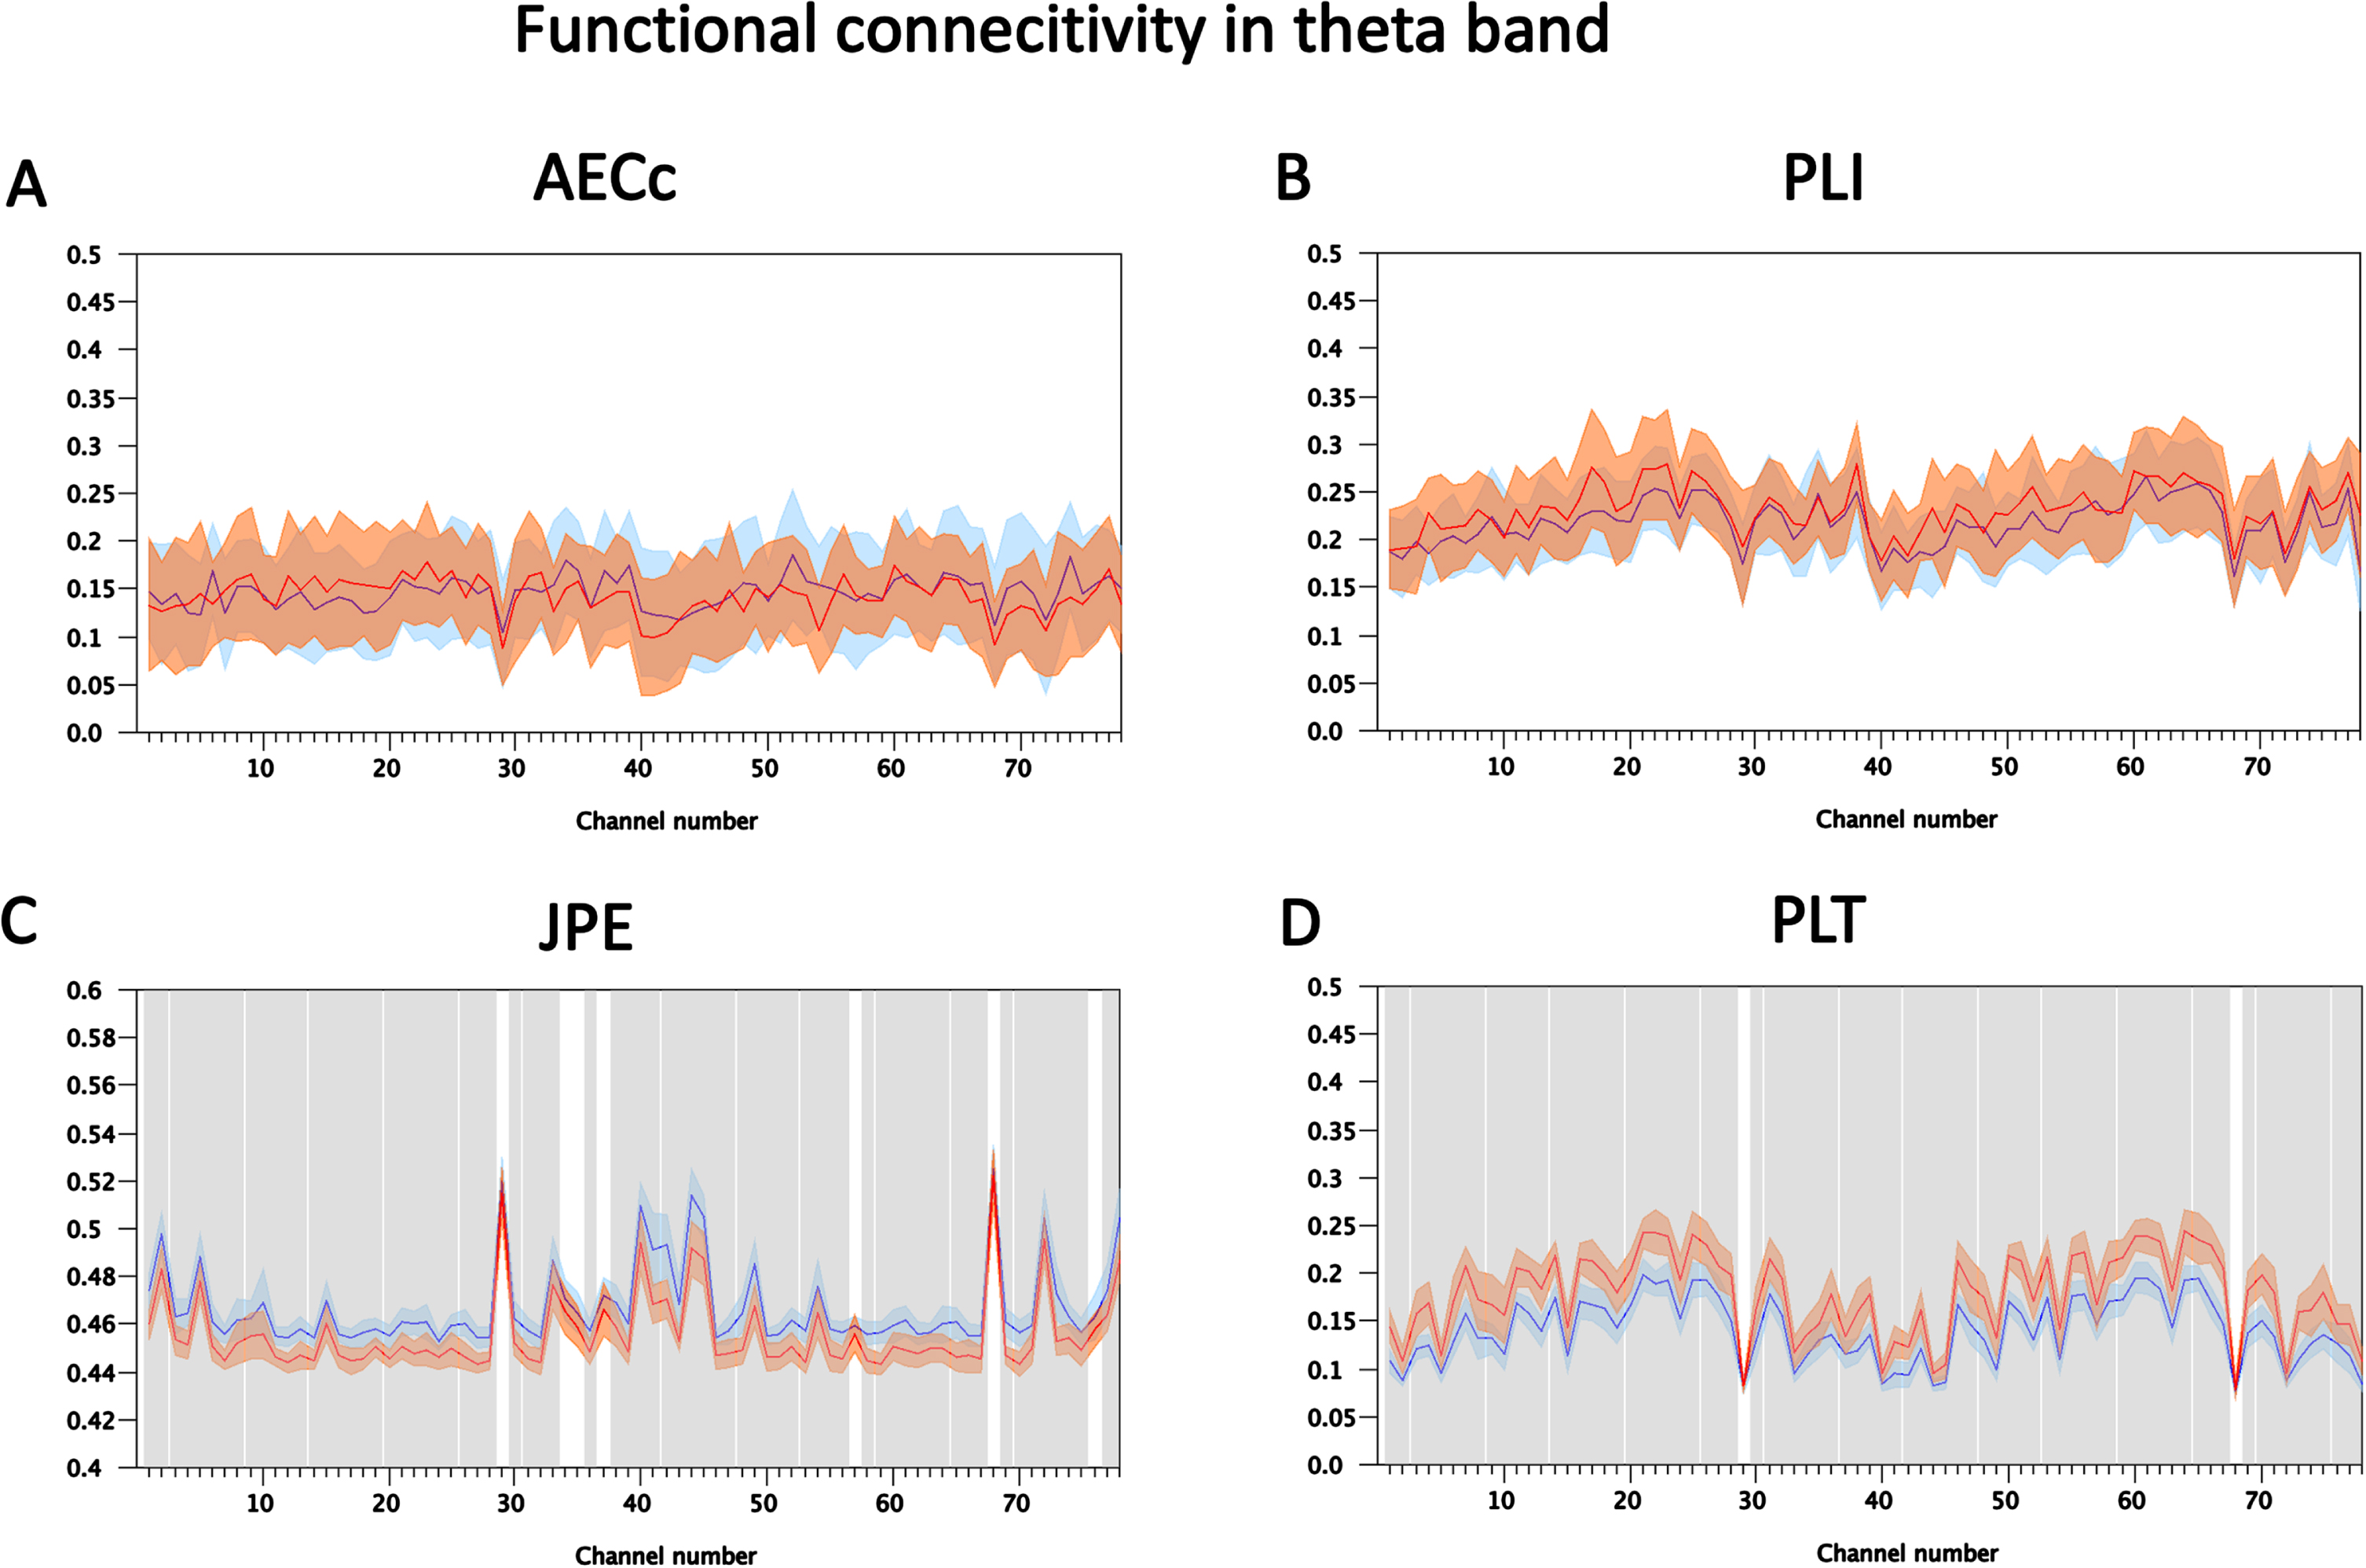 Detailed results for FC markers in theta band (4-8 Hz) at timestep T = 5. Shown are the mean values (shading 2 standard errors of the mean) of functional connectivity measures for each of the 78 ROIs for the set of 20 ADD and 20 Con files. A) Results for AECc. No significant differences between ADD and Con after FDR correction. B) Results for the PLI. No significant differences between ADD and Con after FDR correction. C) Results for the JPE. The blue curve, corresponding to the ADD group, shows higher values than the red curve, corresponding to the Con group. Significant differences after FDR correction are indicated with gray shading. D) Results for the PLT. The ADD group has lower values than the Con group (red line). Significant differences after FDR correction are indicated with gray shading.